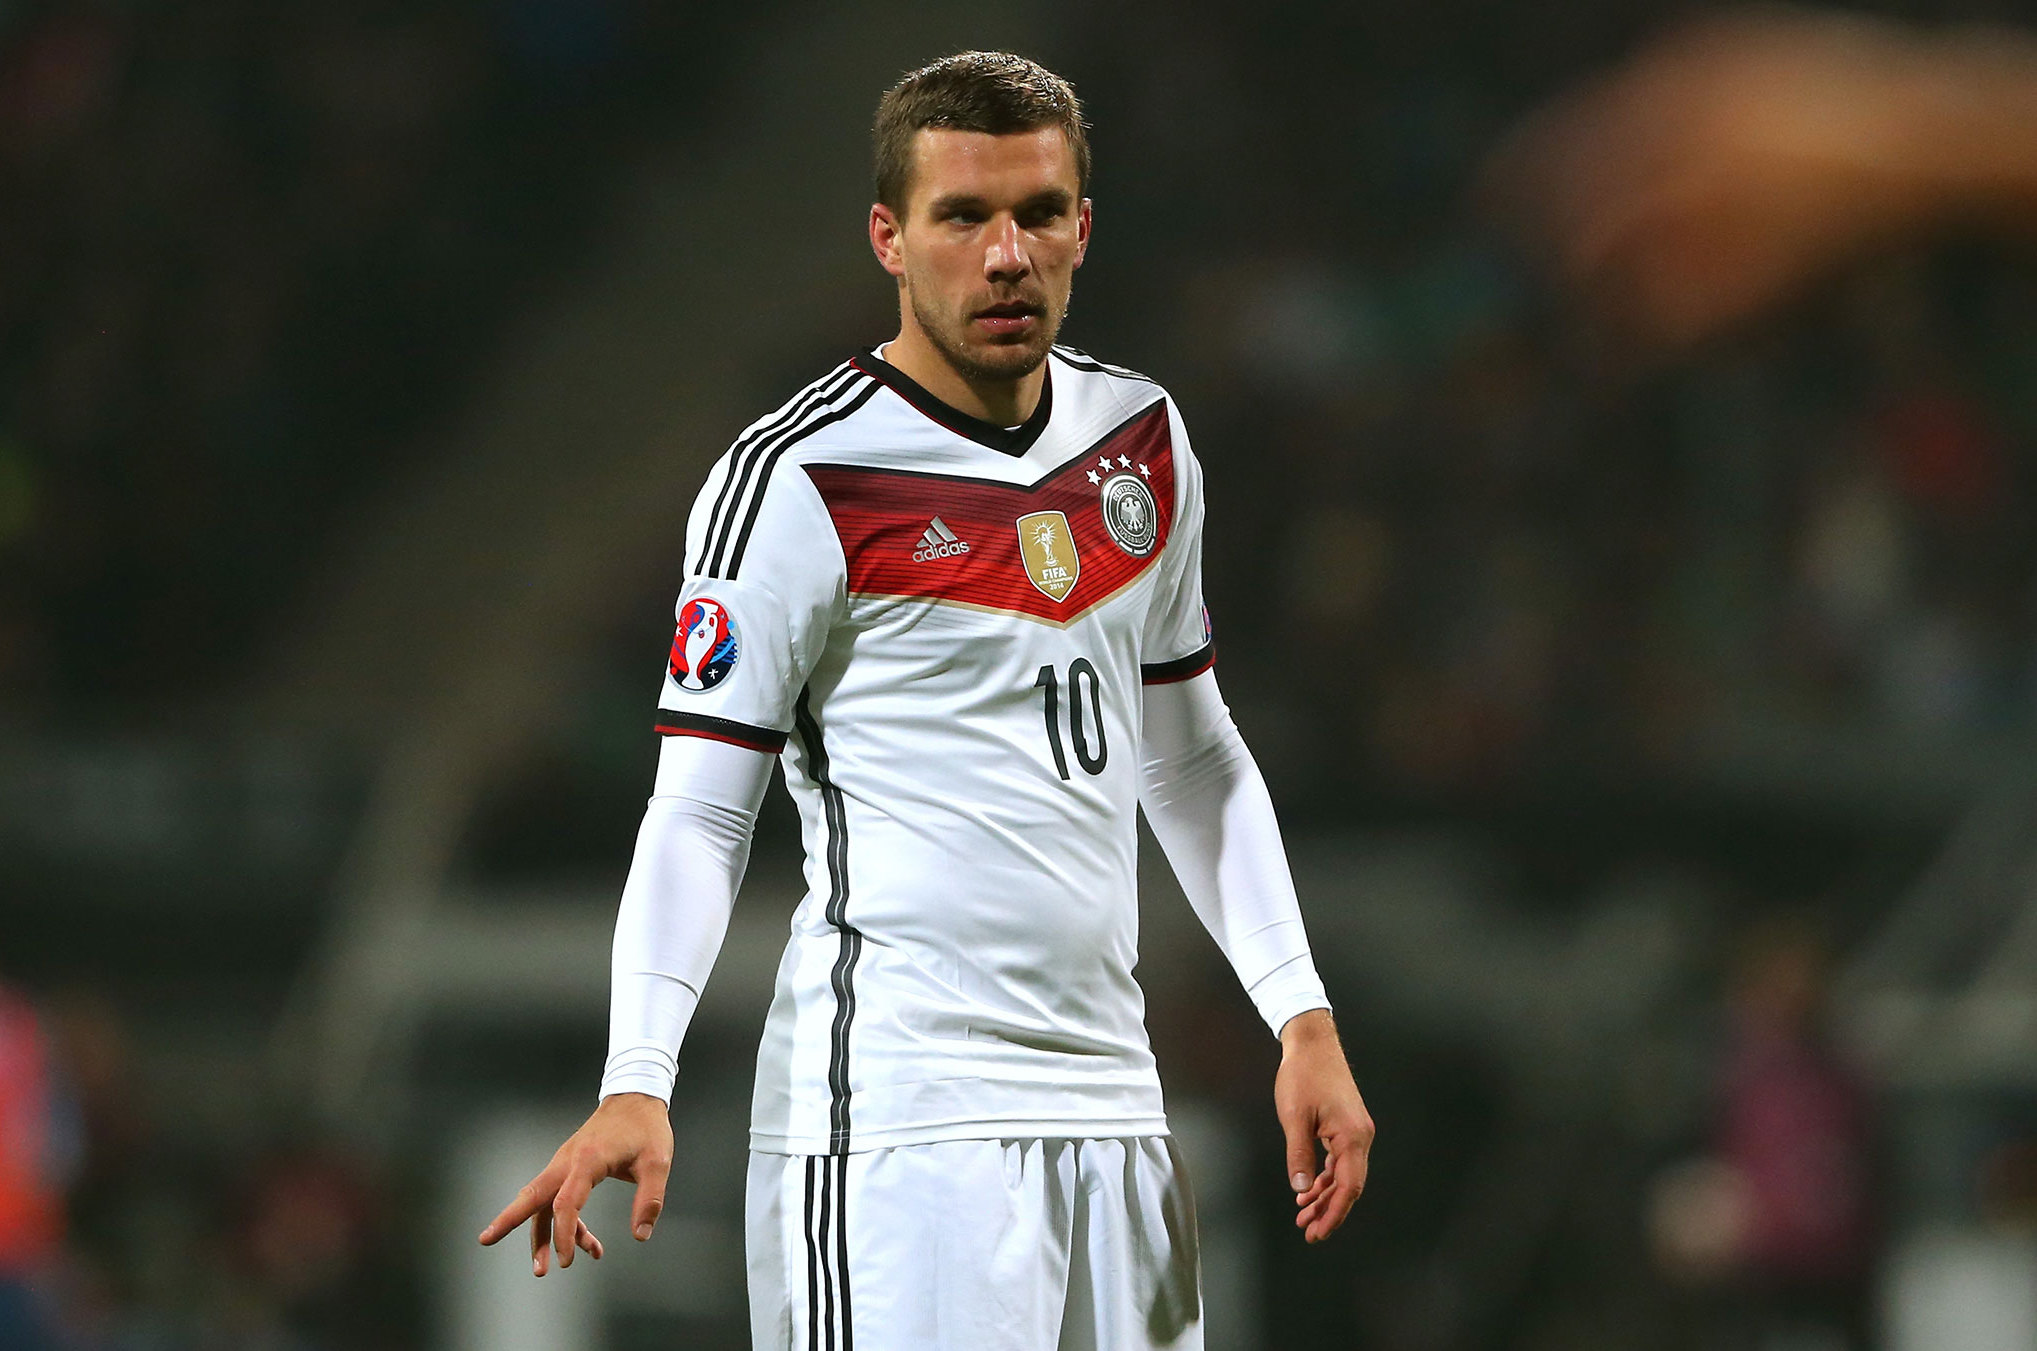 Sky: Poldi’s will helping Inter, Diarra waiting only on FIFA’s decision